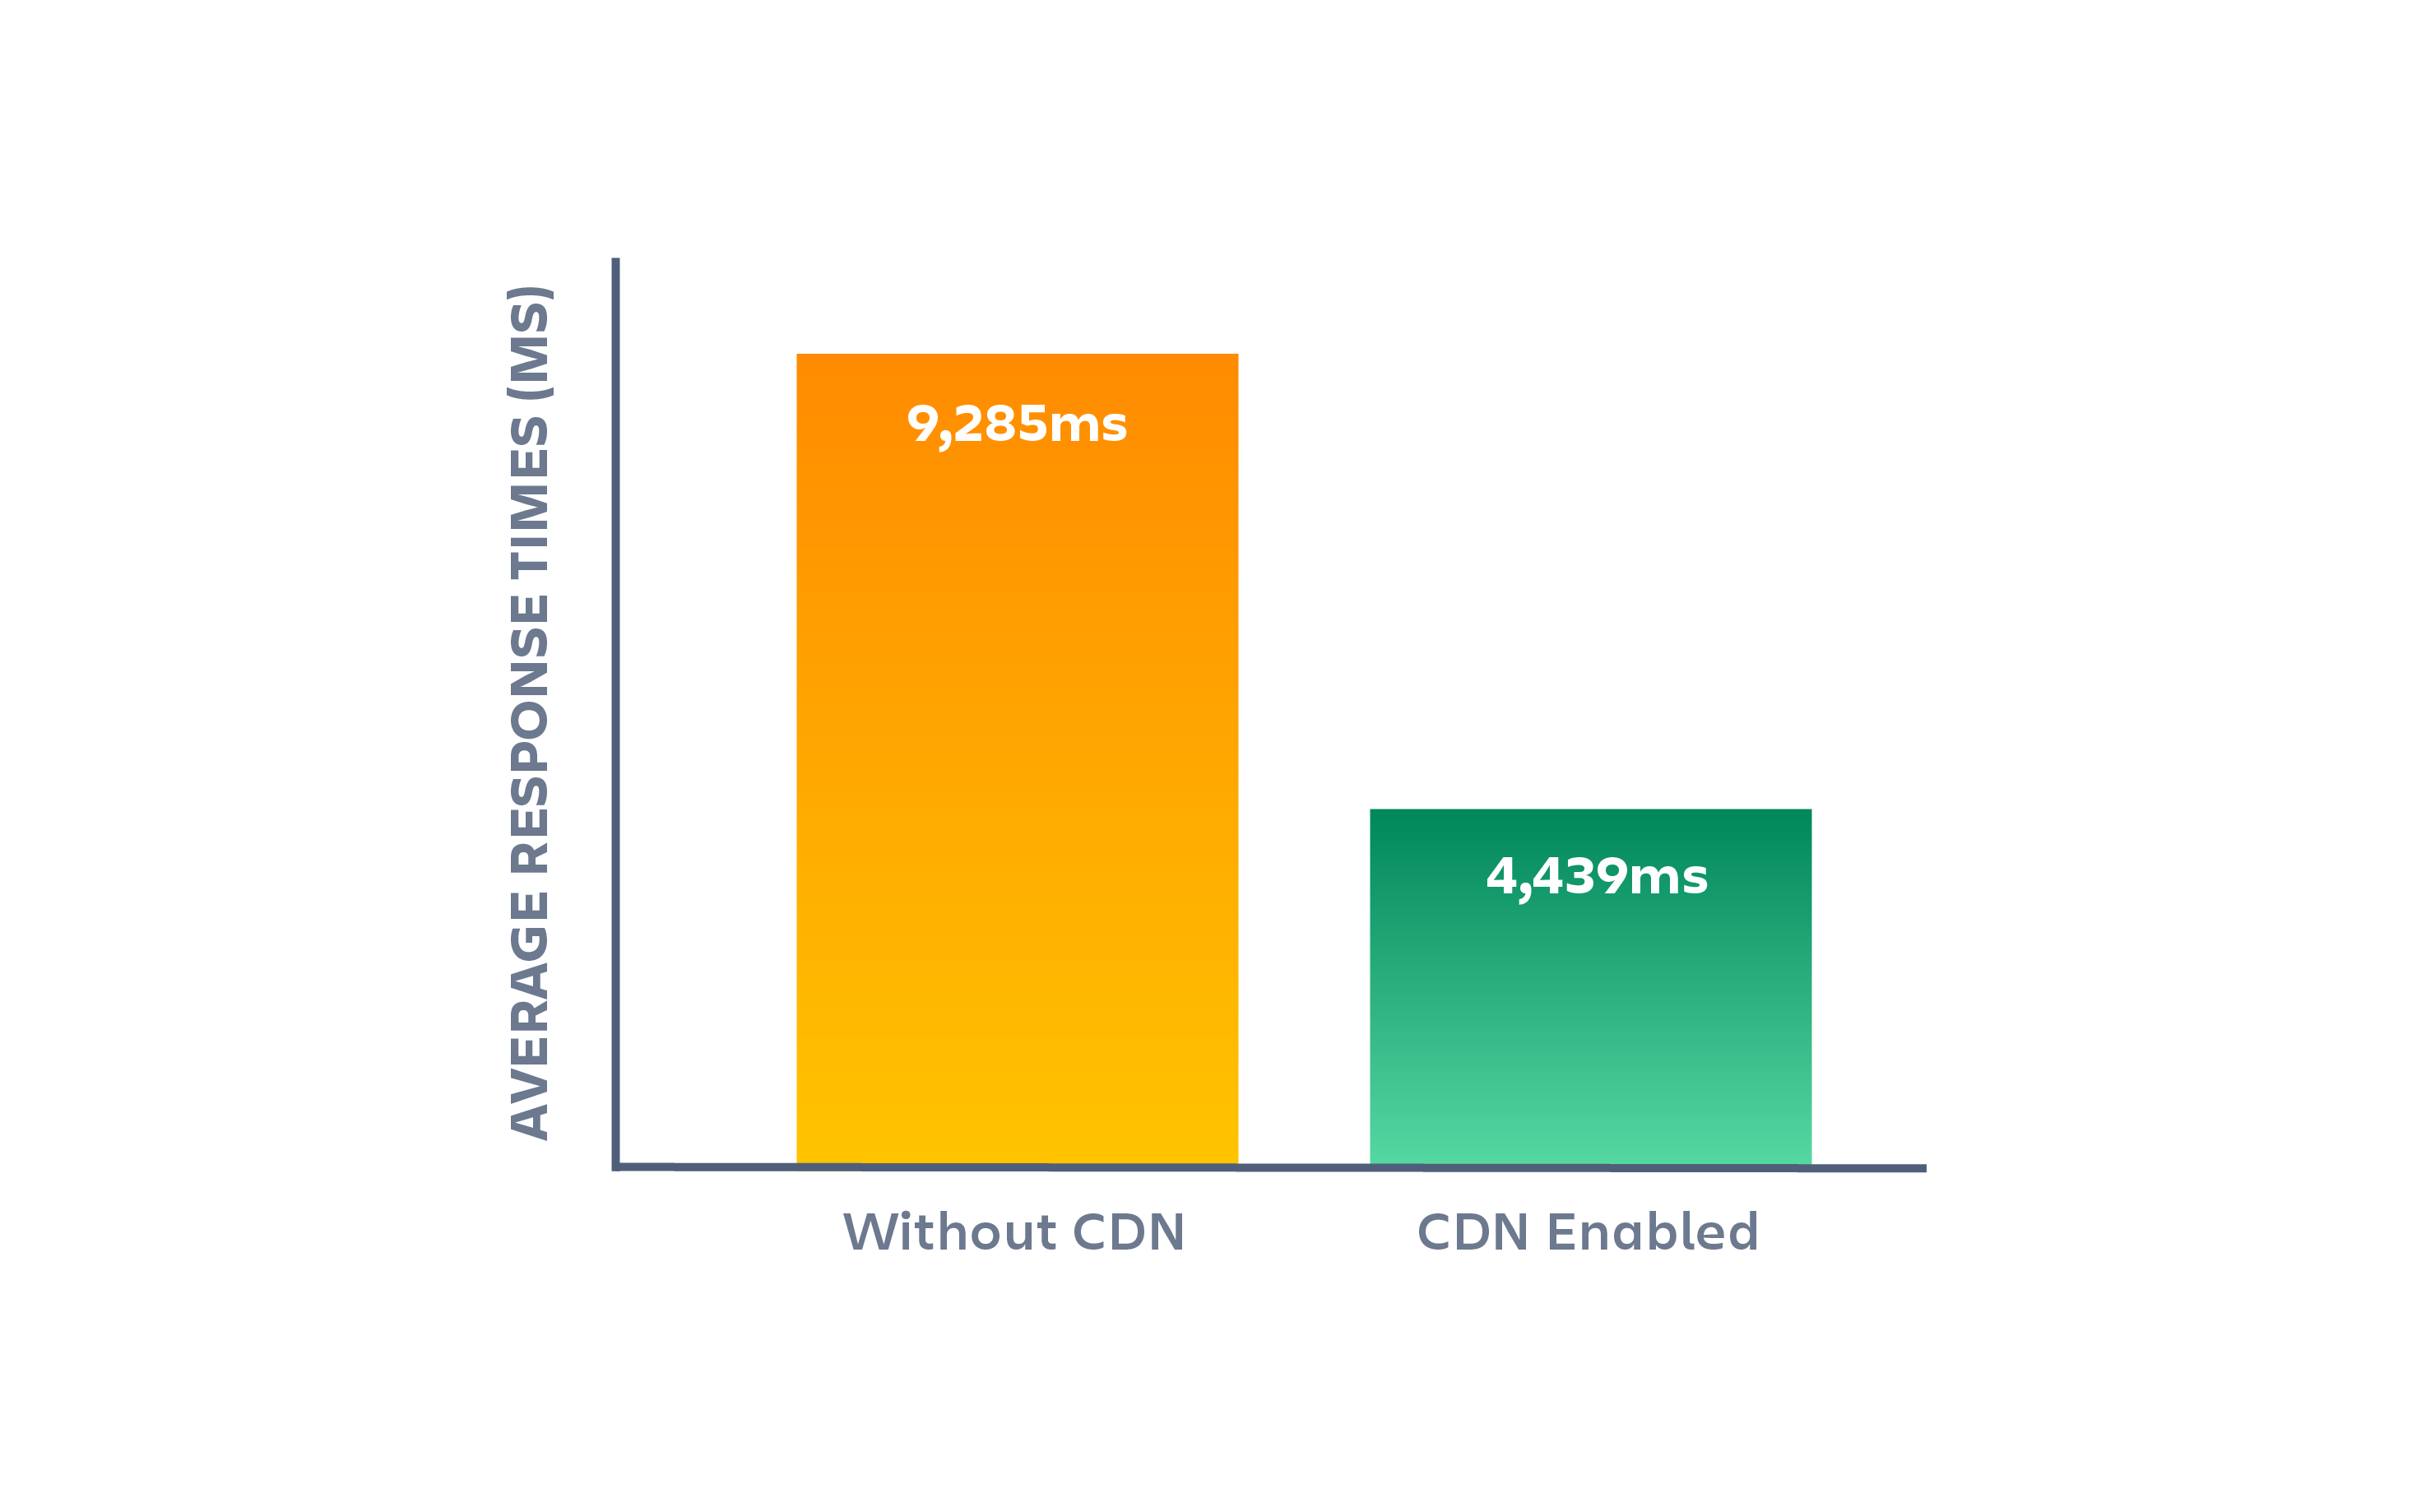 bar graph showing response time with and without a CDN